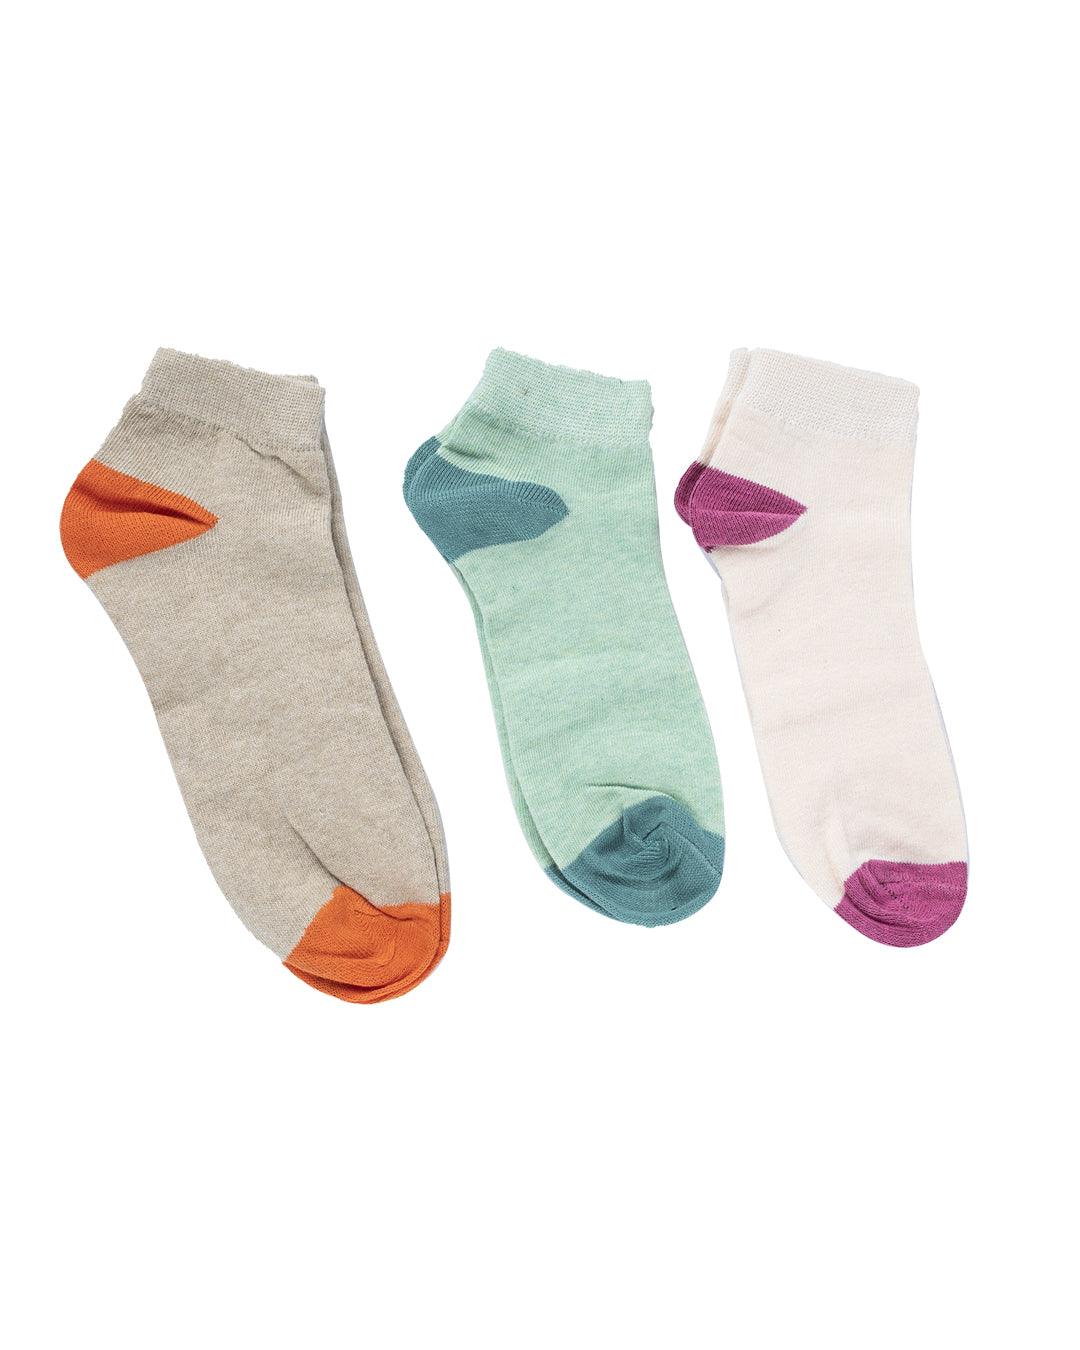 2 pack women's ankle socks white and pink - Dim Basic Coton